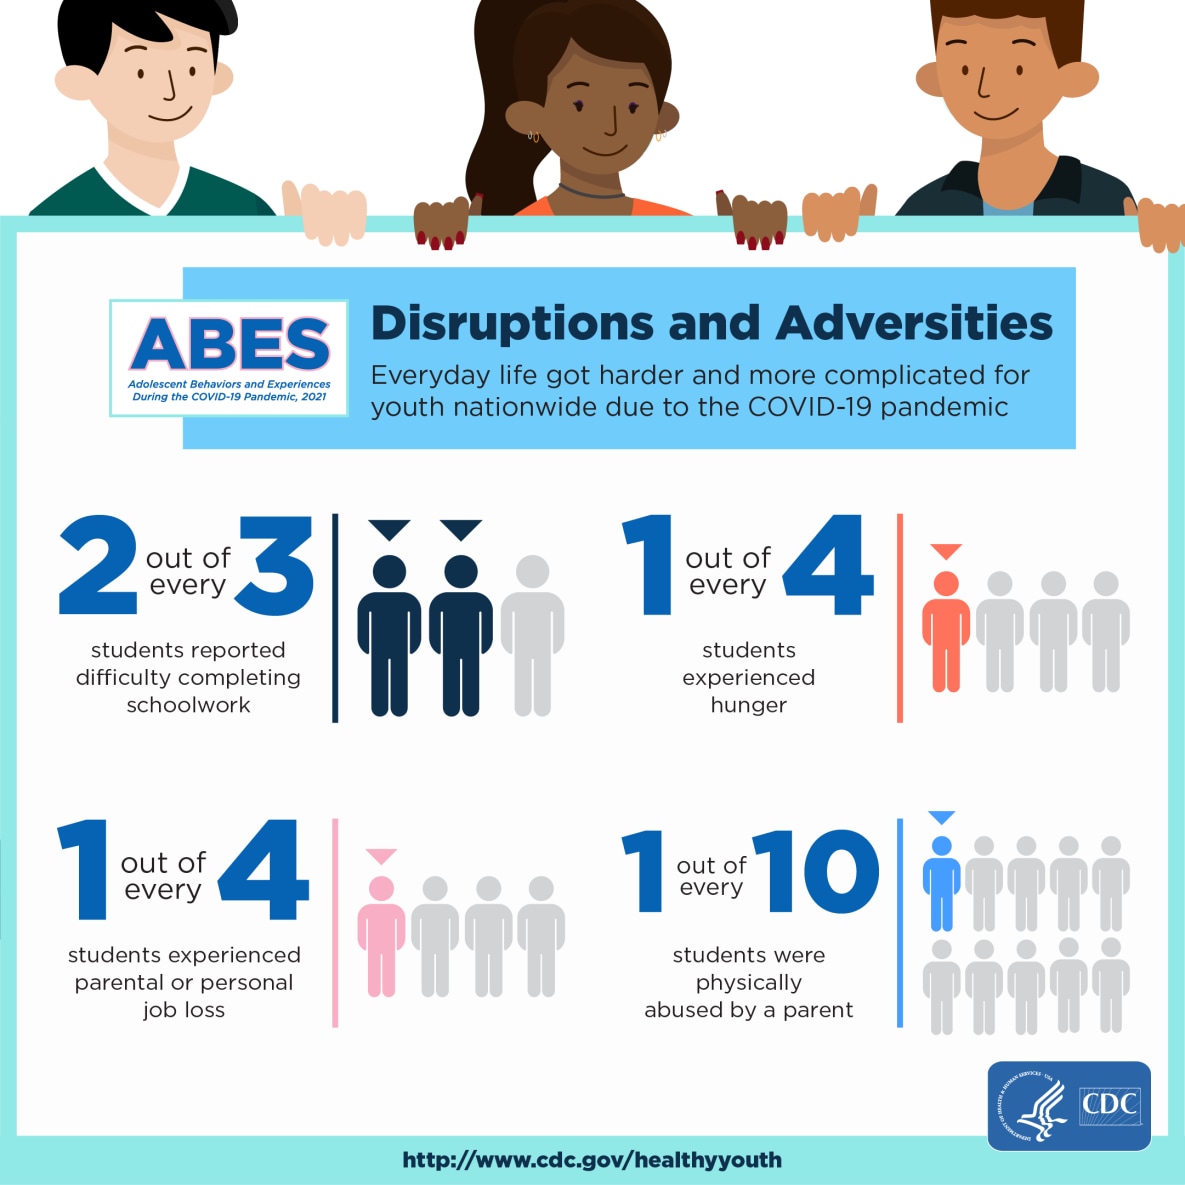 DASH ABES Social Disruptions and Adversities infographic